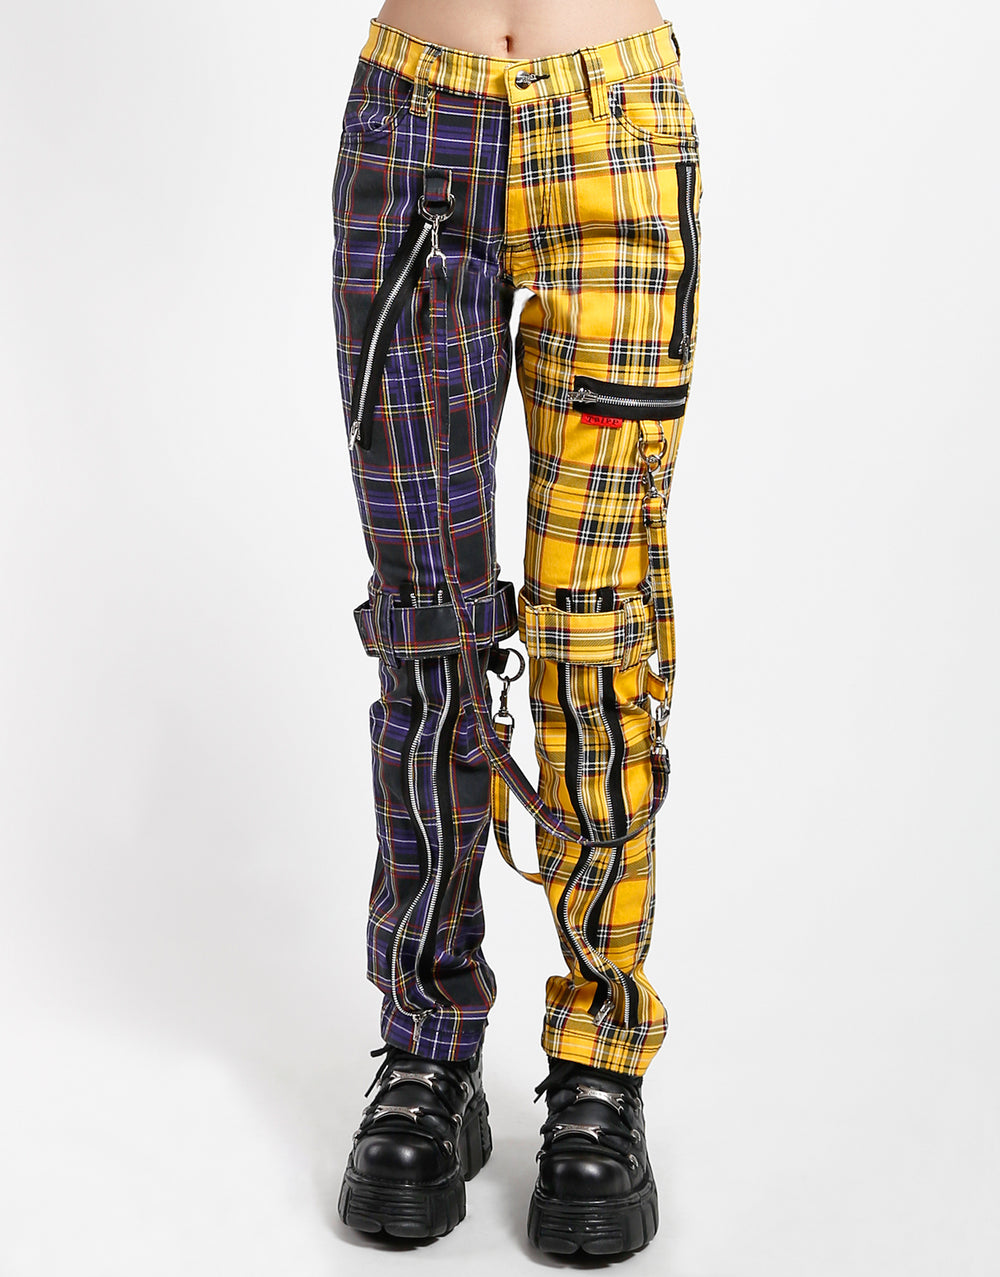 Men's Fashion Plaid Pants Yellow and Brown - Etsy Sweden